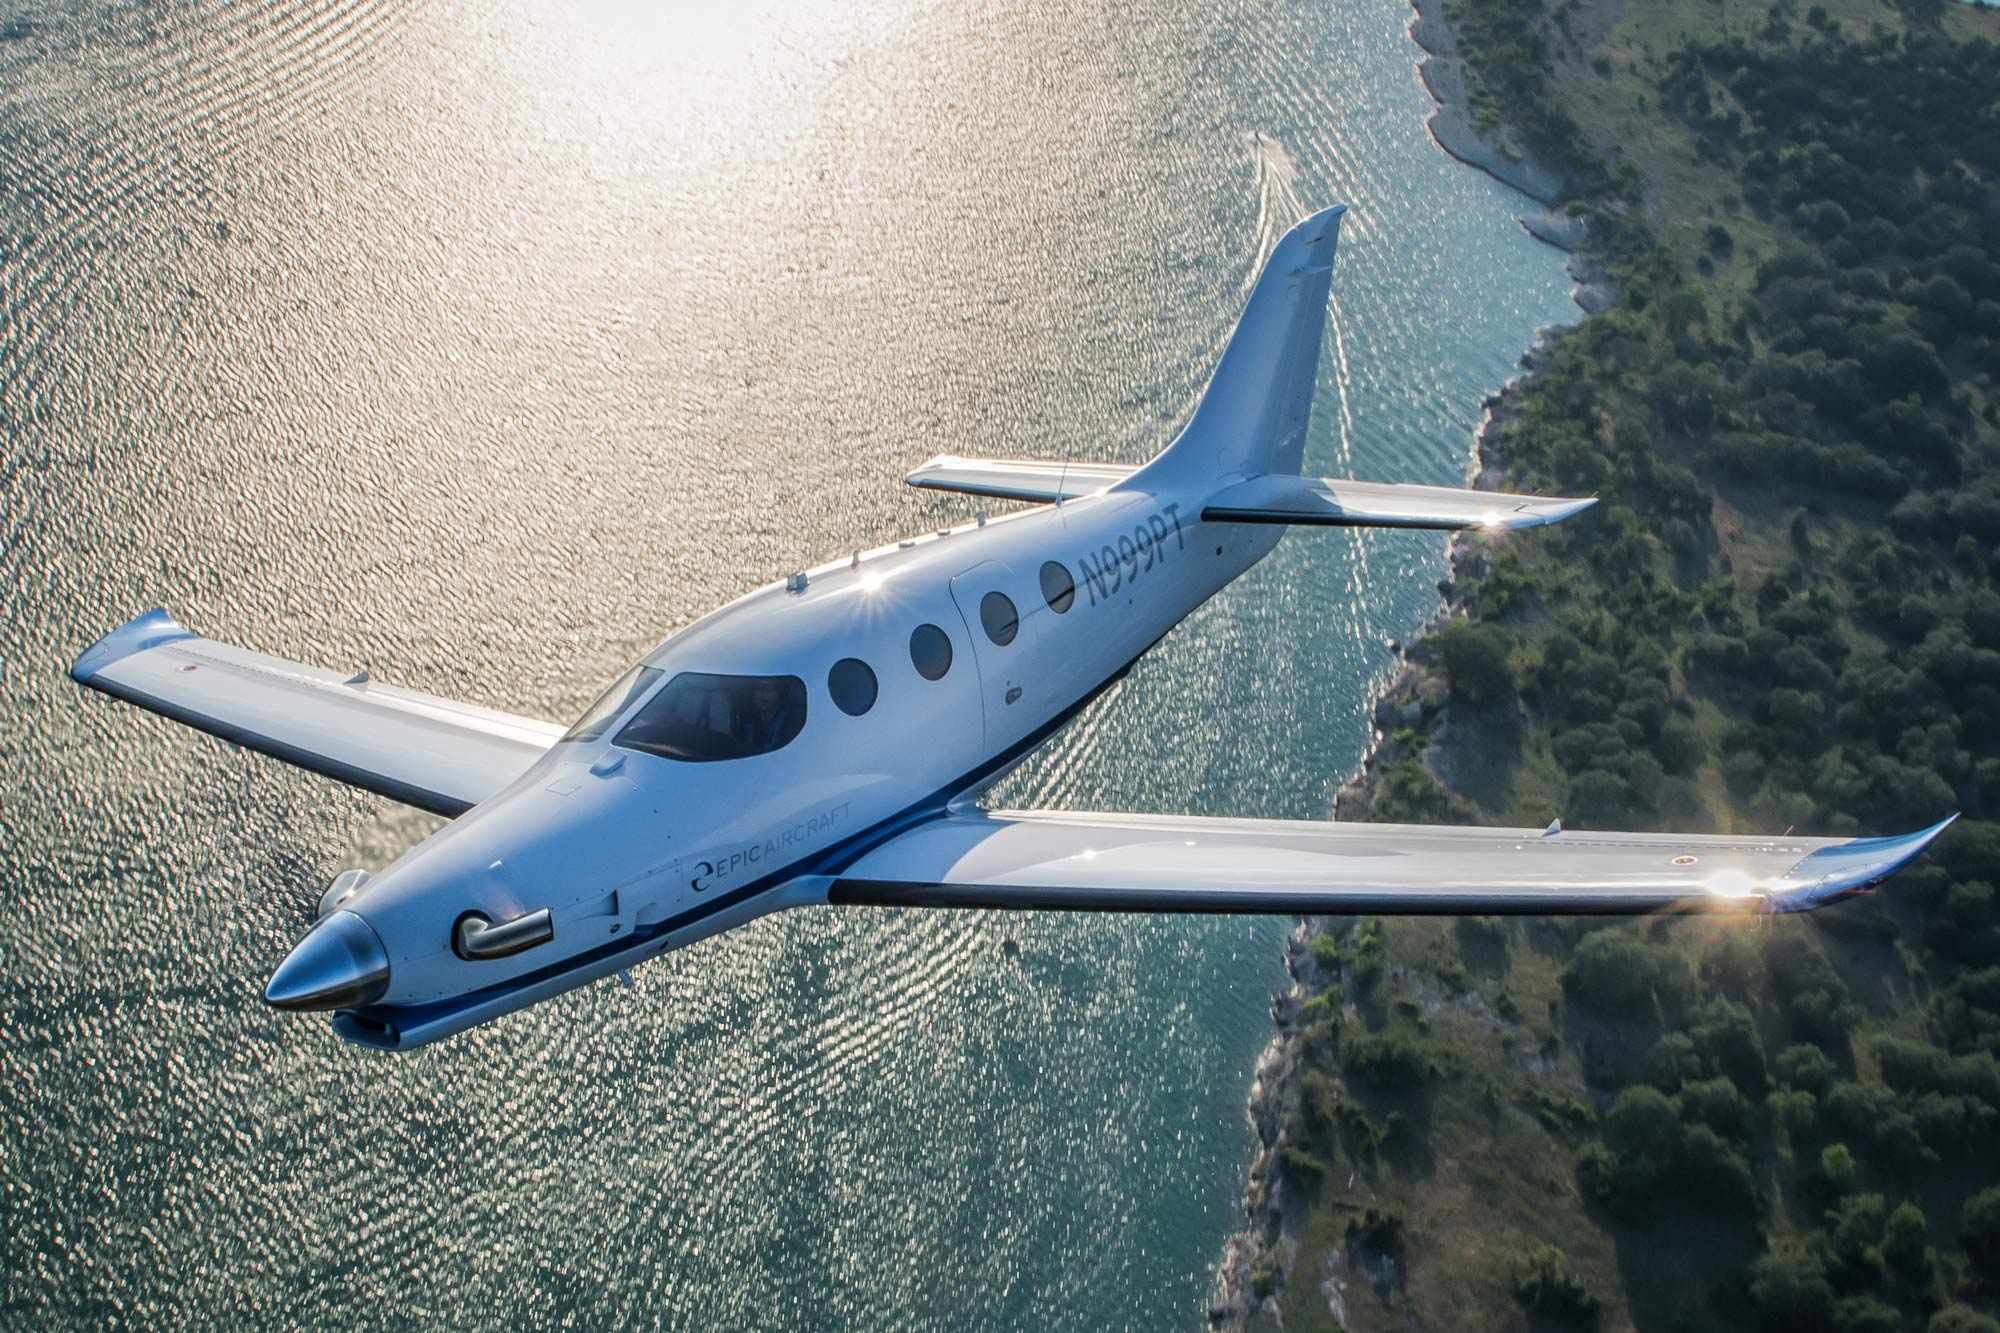 Pre-Owned Aircraft Market Being Driven by Motivated Cash Buyers